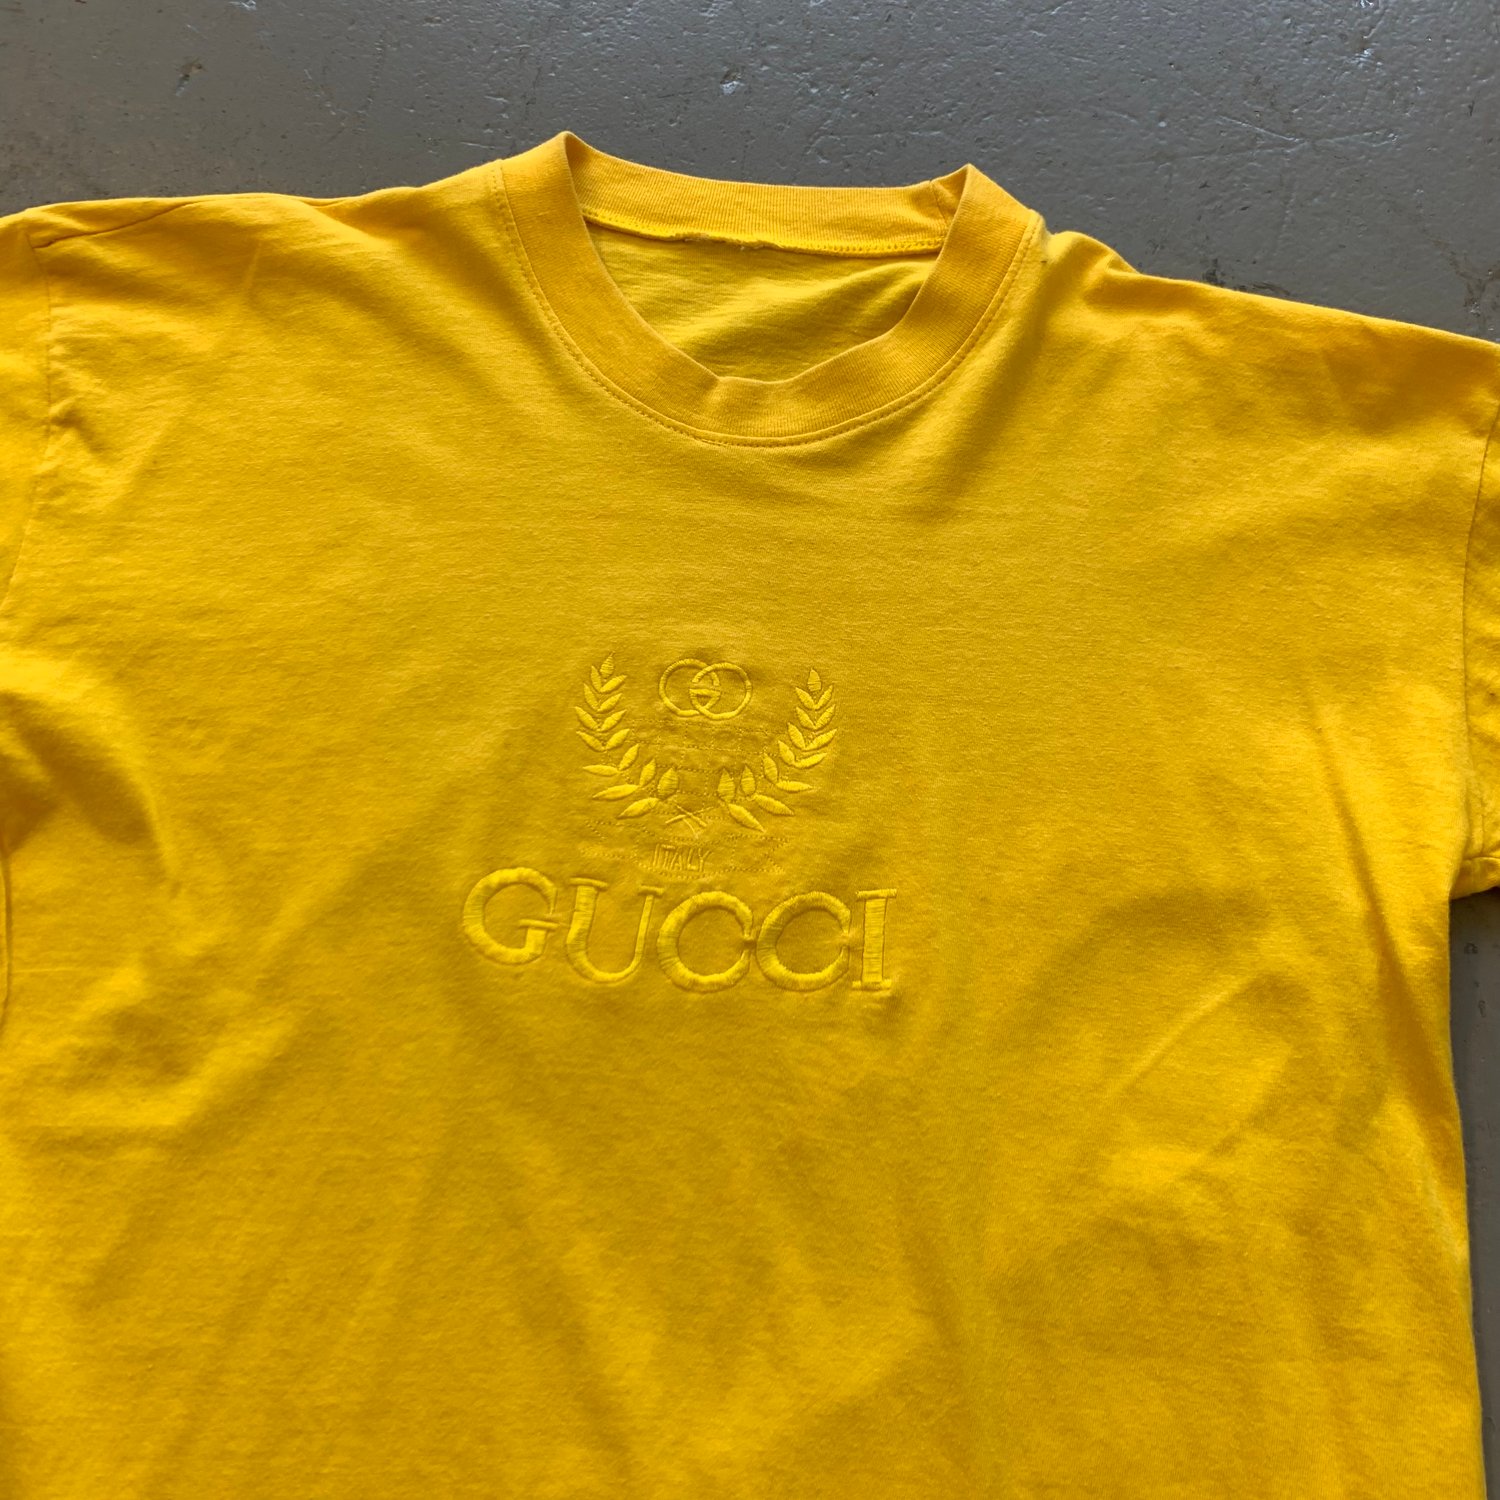 Image of Vintage 80s bootleg Gucci embroidered T-shirt size medium 